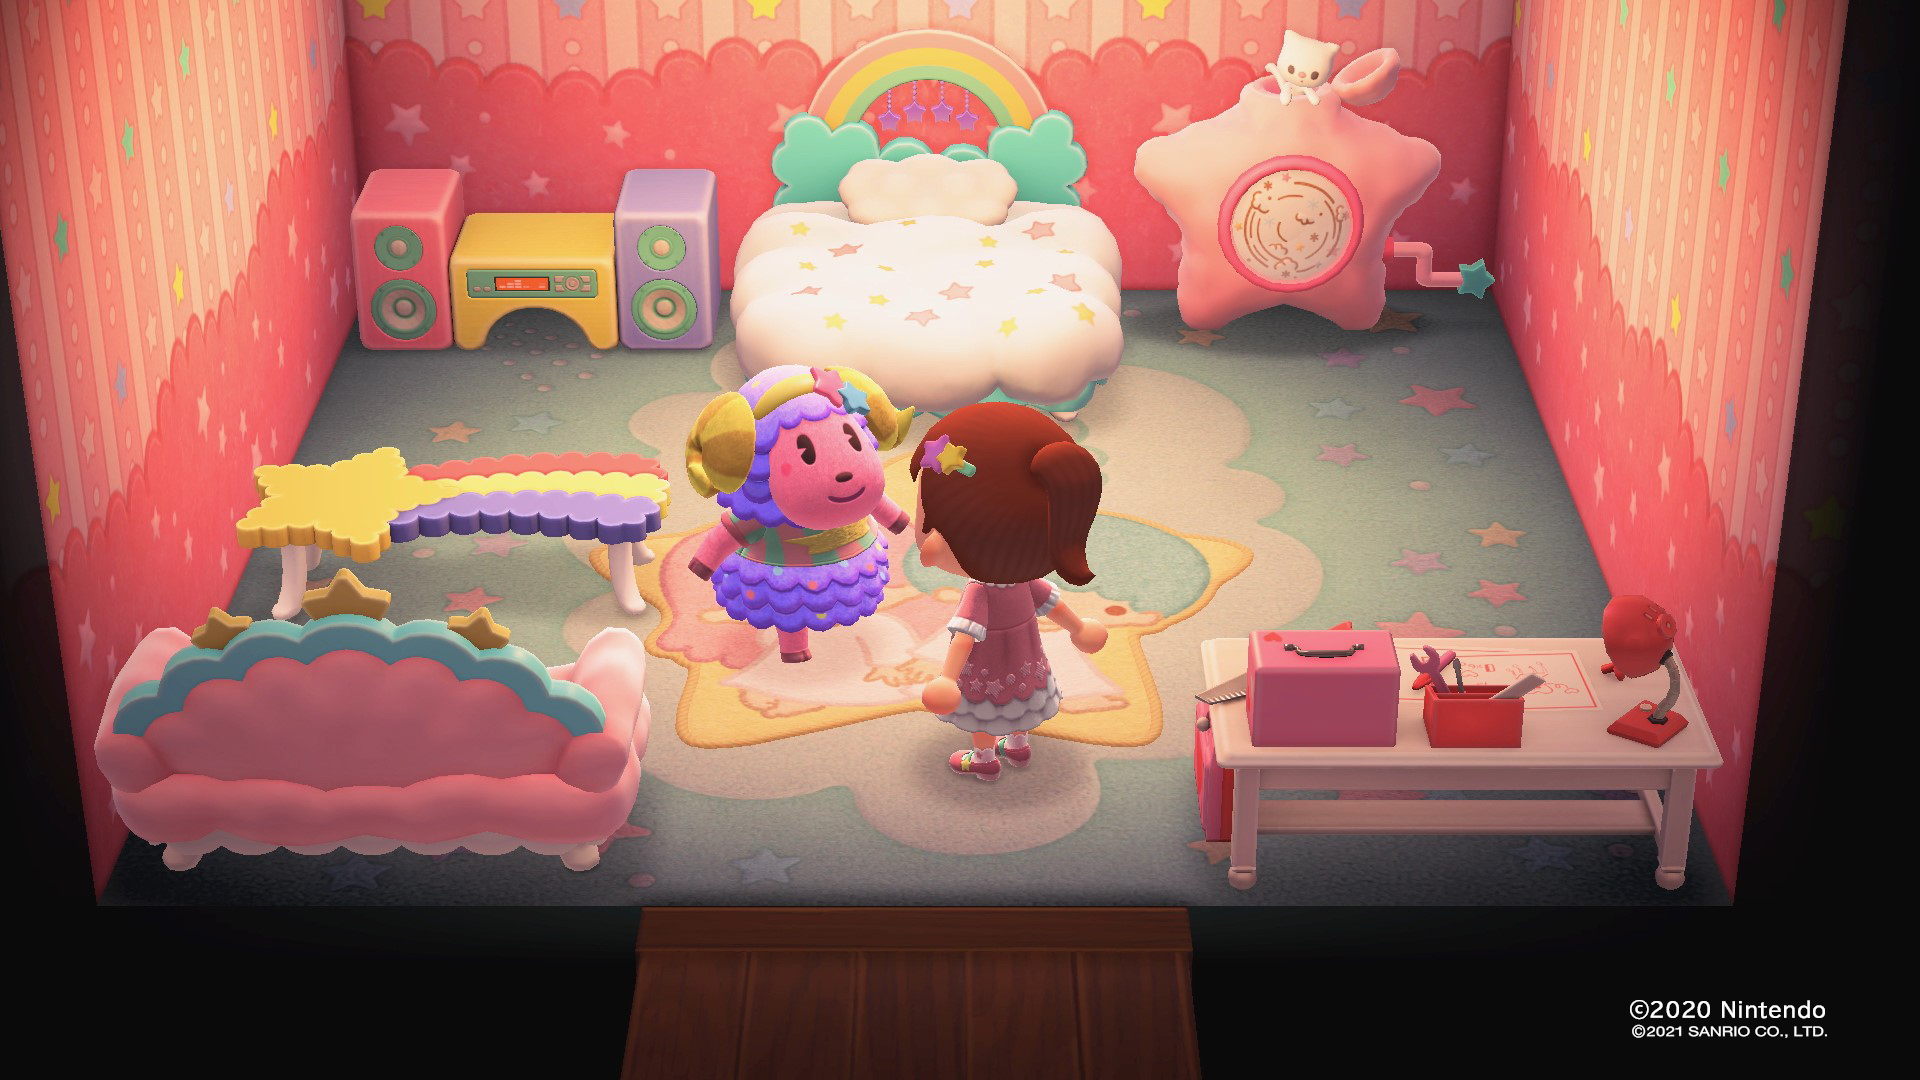 Special Residents Themed Items And More Come To Animal Crossing New Horizons Via A Free Update On March 18th News Nintendo